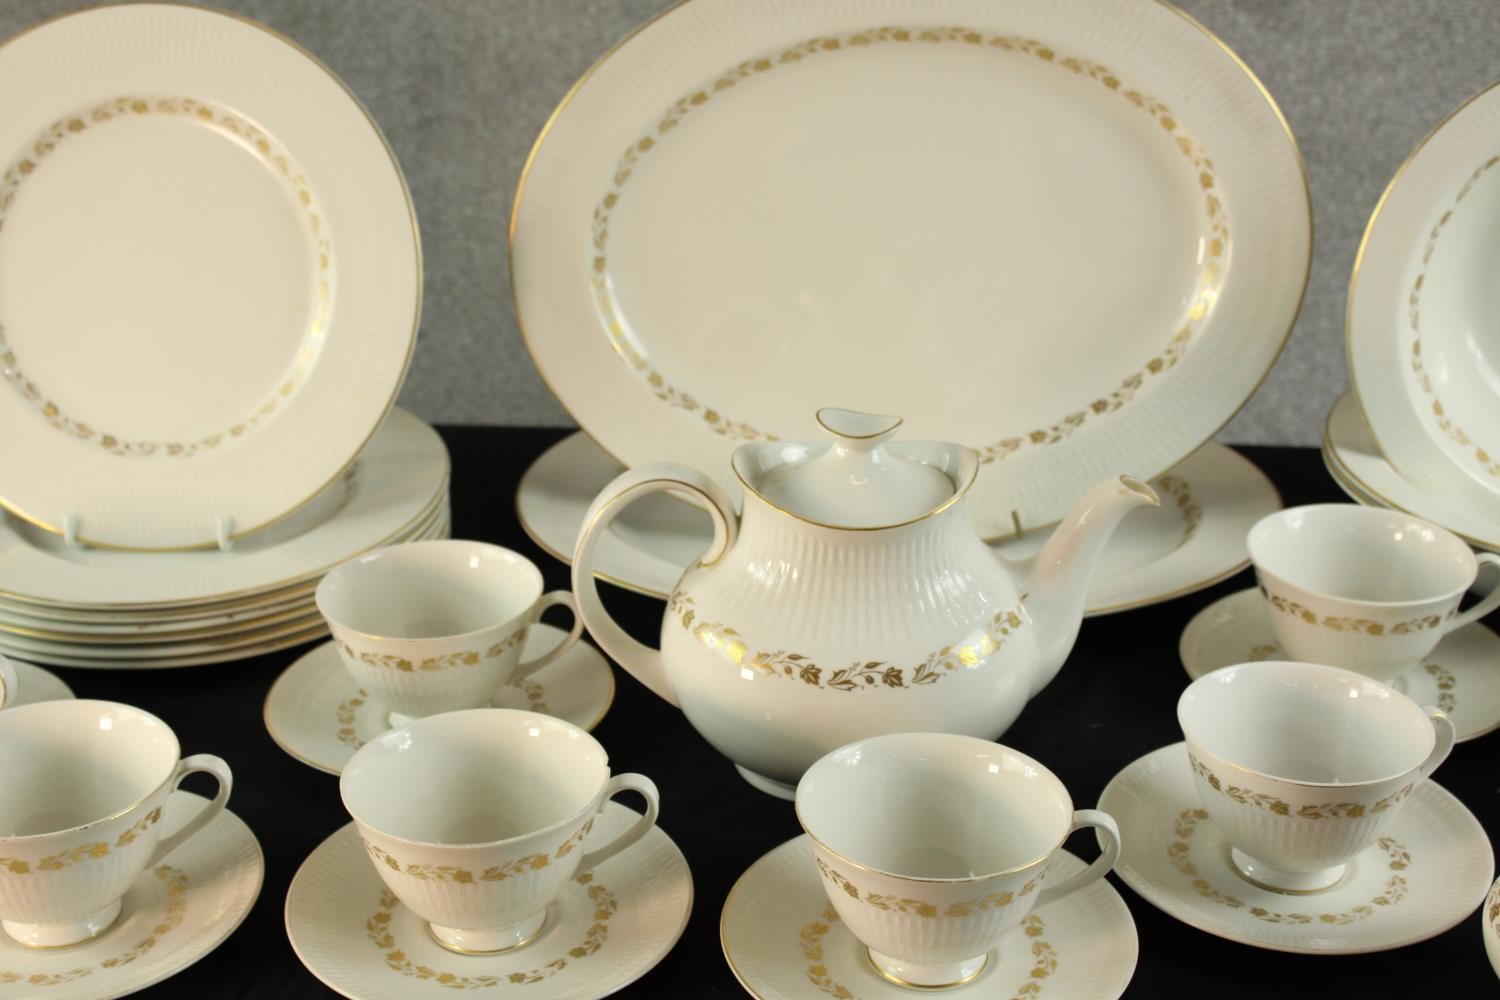 An extensive Royal Doulton Fairfax pattern tea and dinner service comprising of cups, saucers, - Image 5 of 12